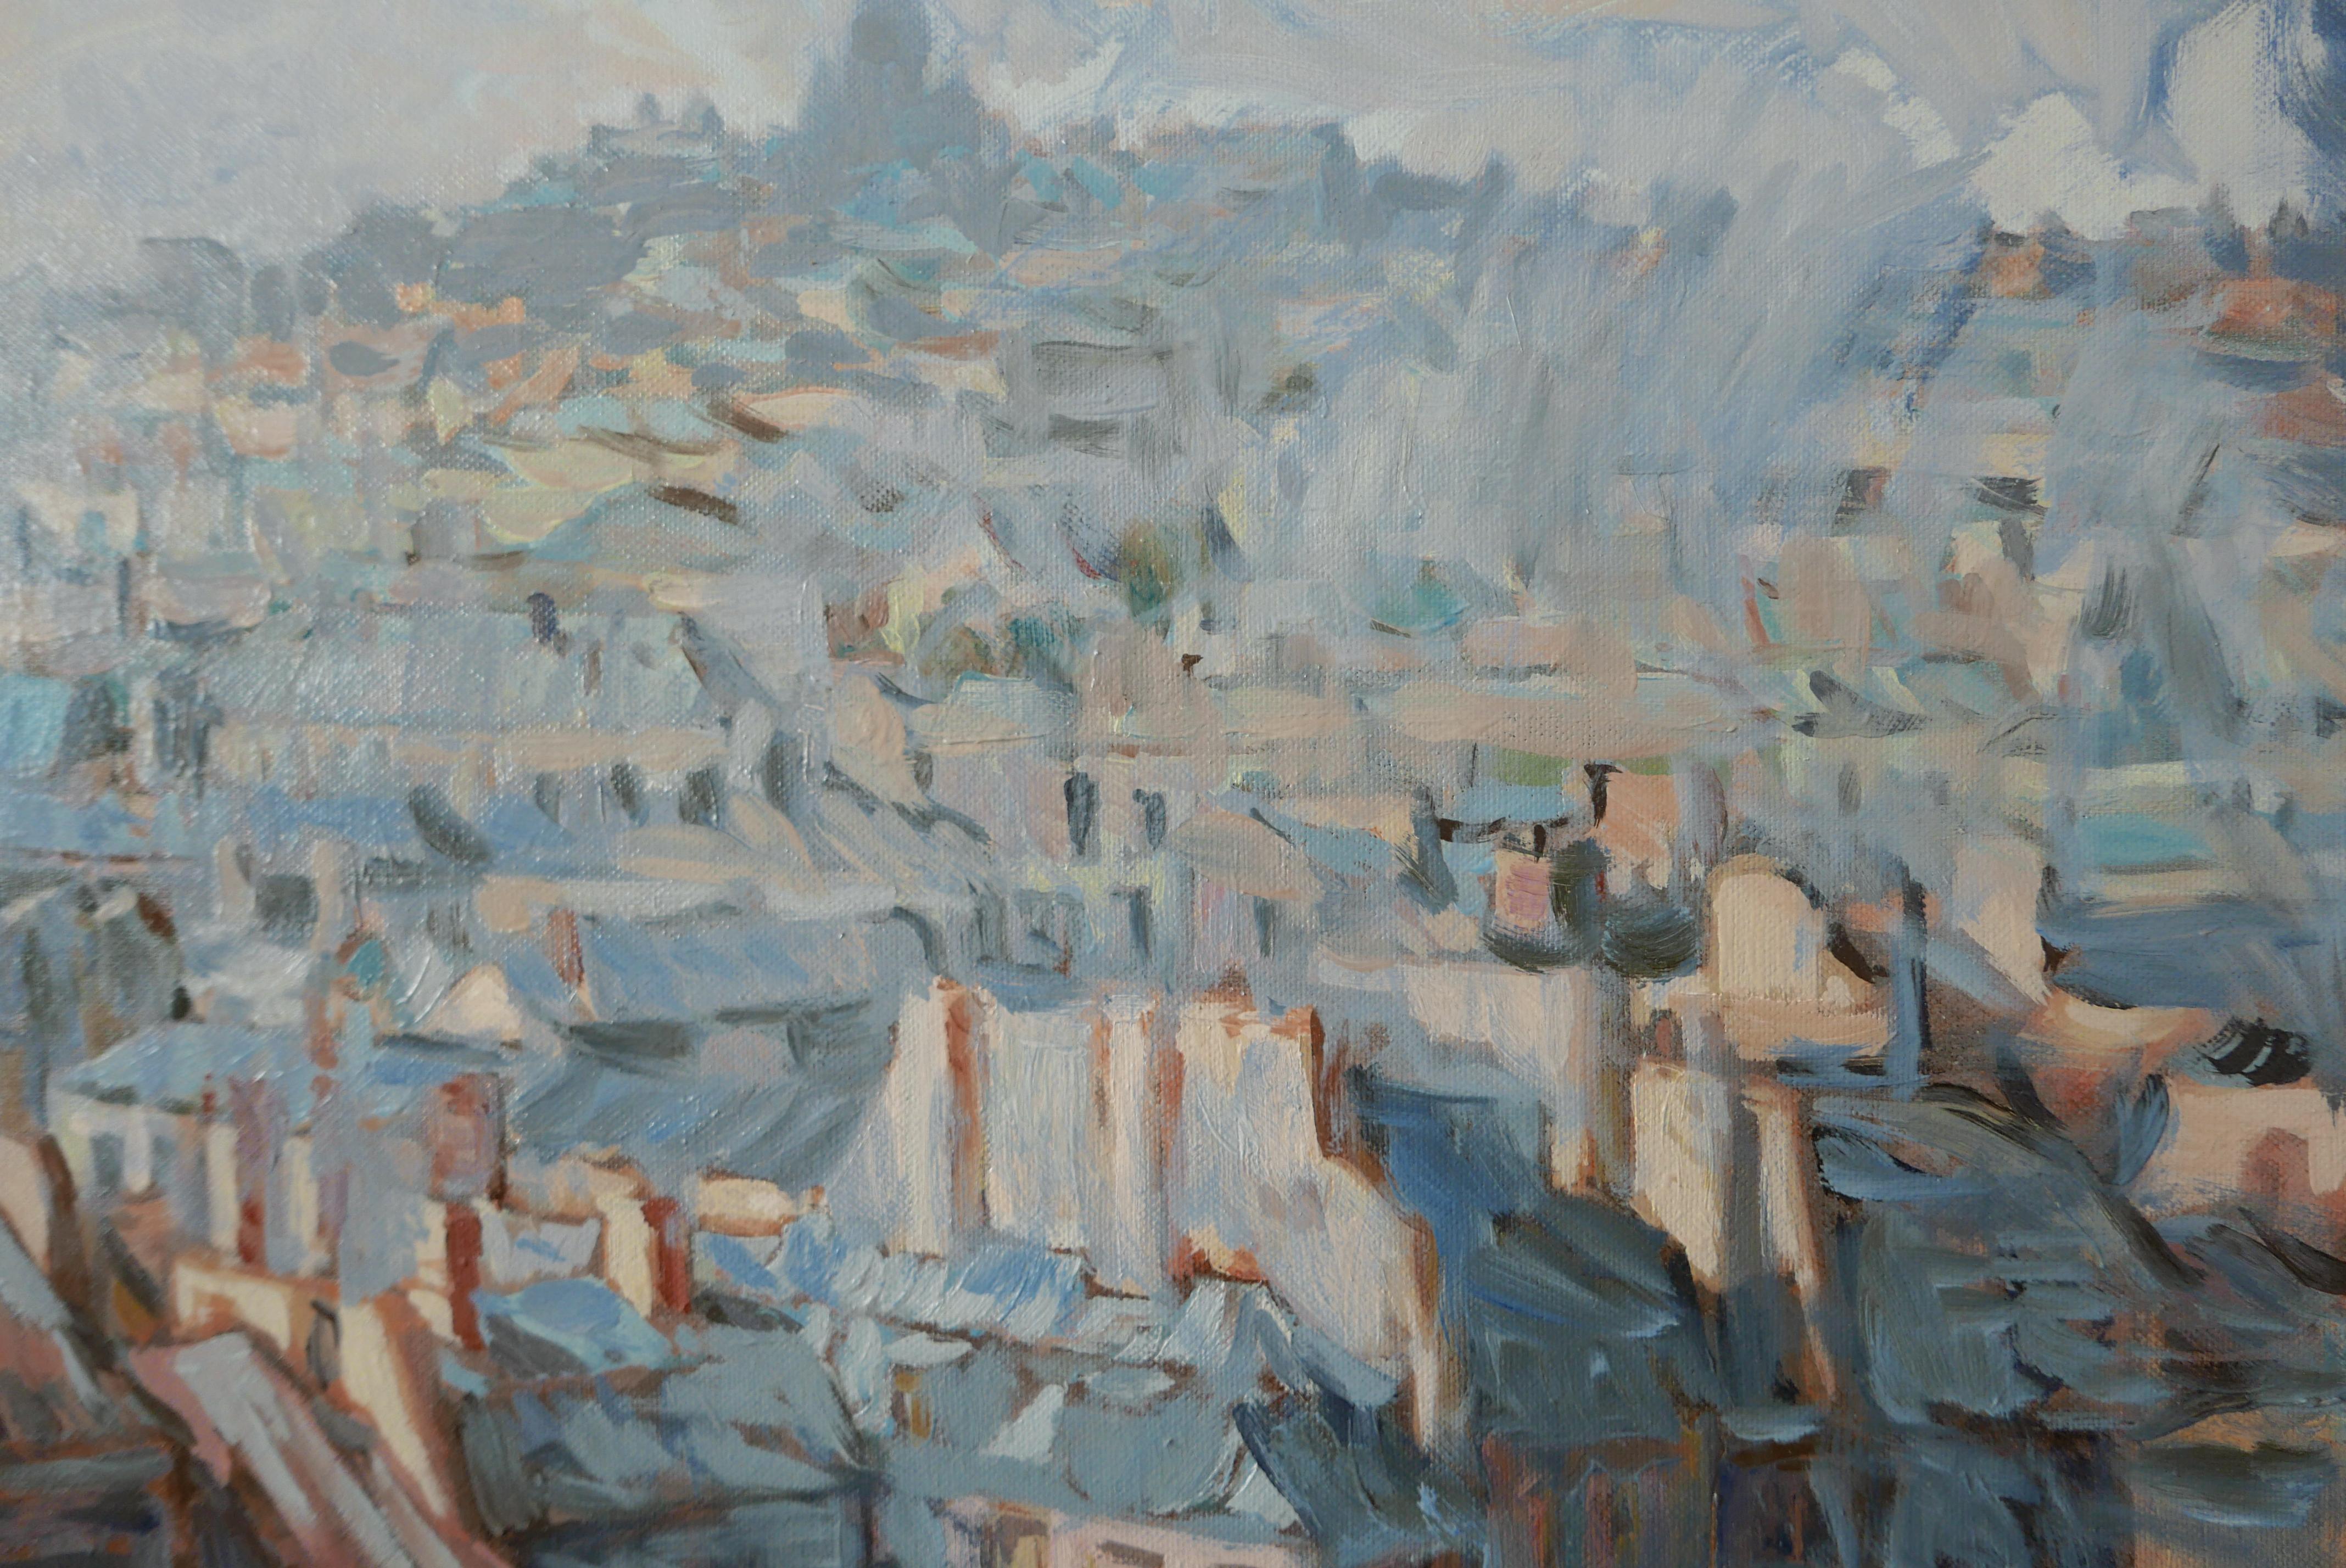 Paris In Clouds - Oil Painting Colors White Yellow Blue Brown Green - Gray Landscape Painting by Petya Deneva